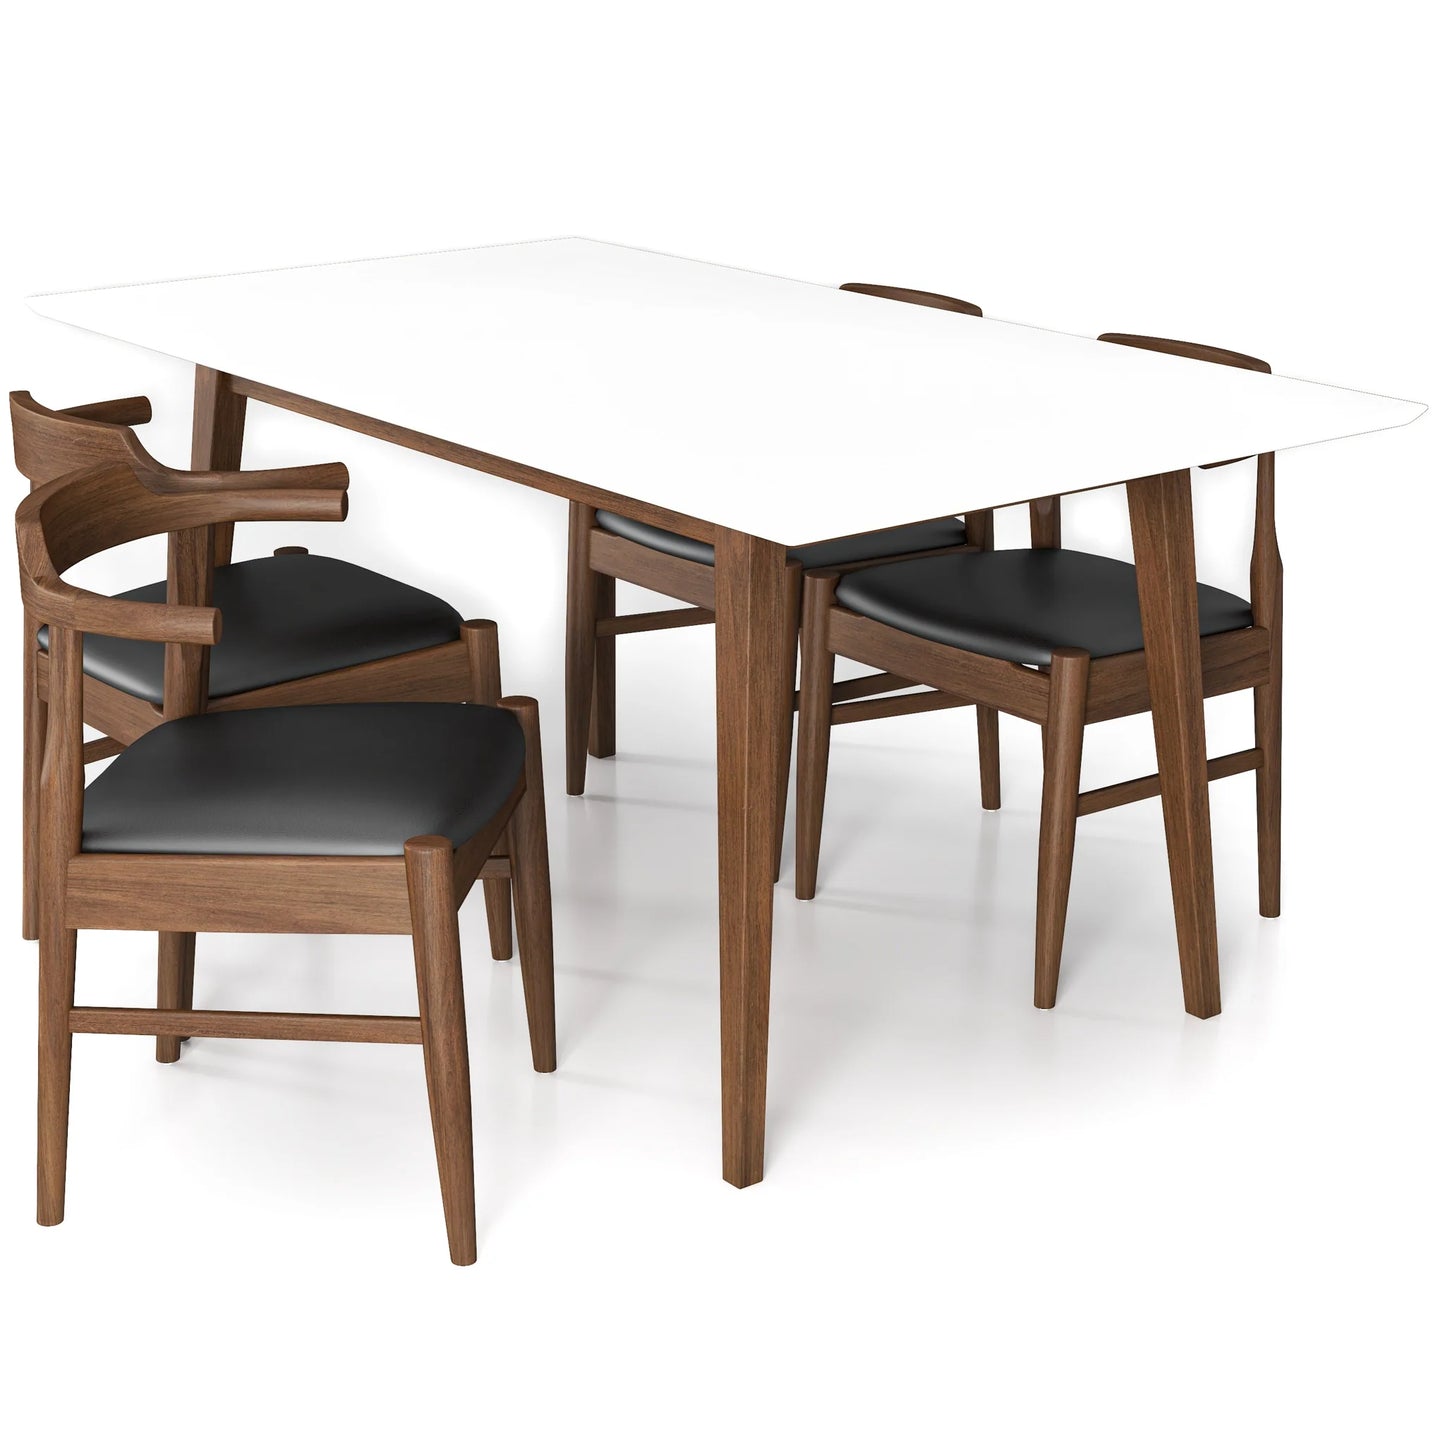 Adira (Large - White) Dining Set with 4 Zola (Black Leather) Dining Chairs